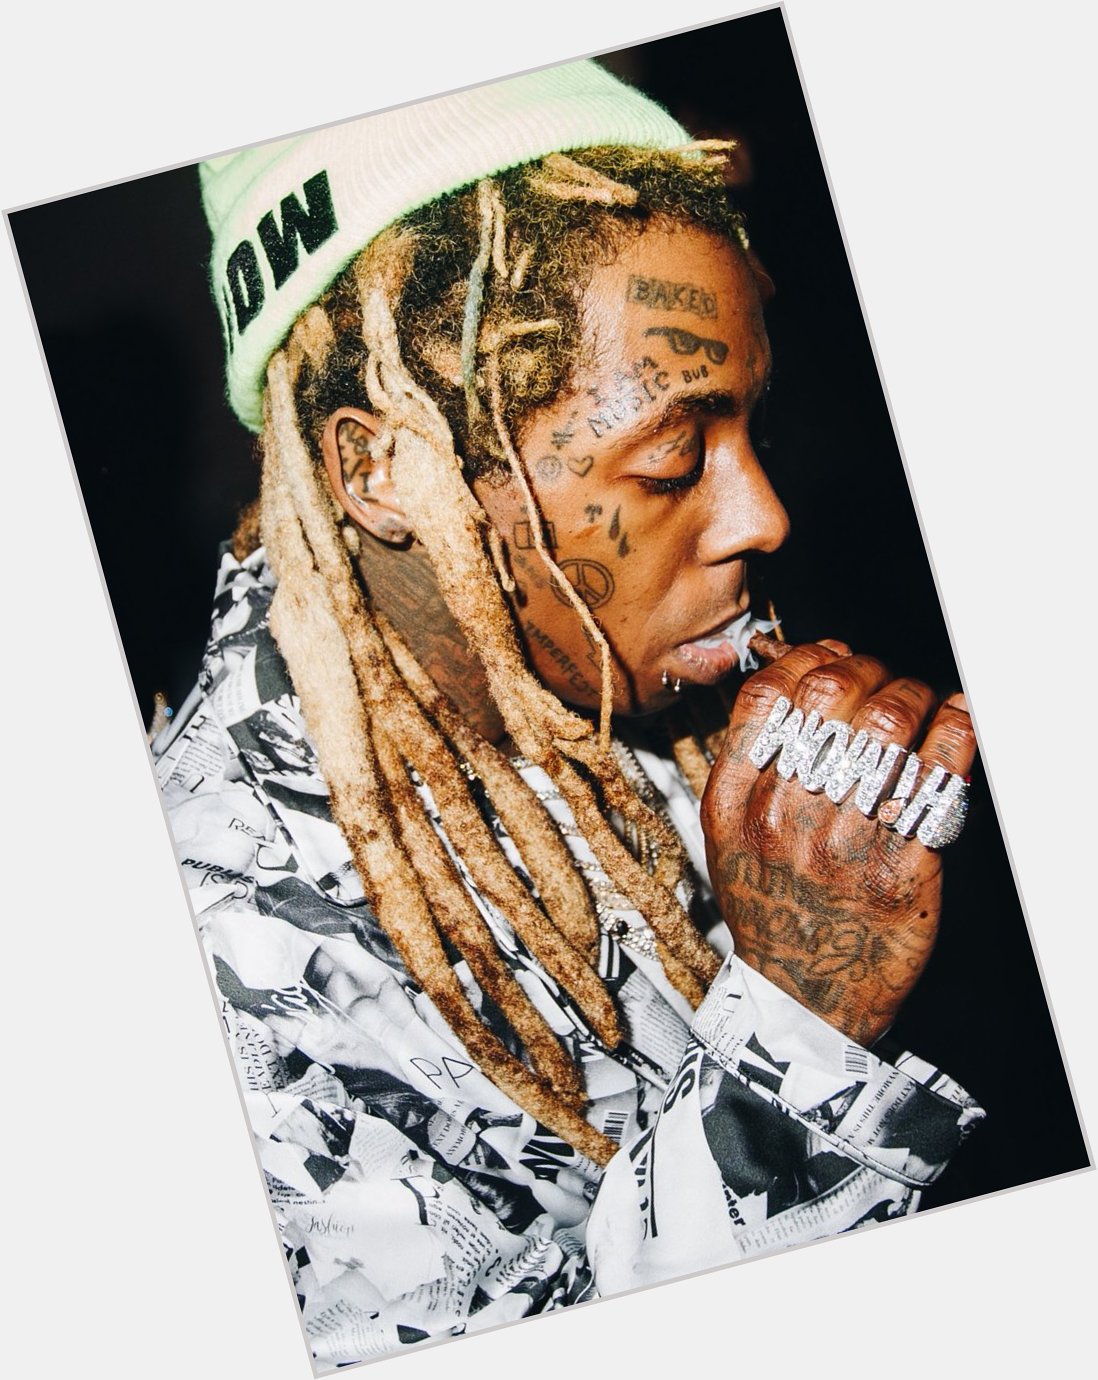 Today Lil Wayne is turning 39, he was born on 27th Sept 1982. Happy Birthday to him!!!     